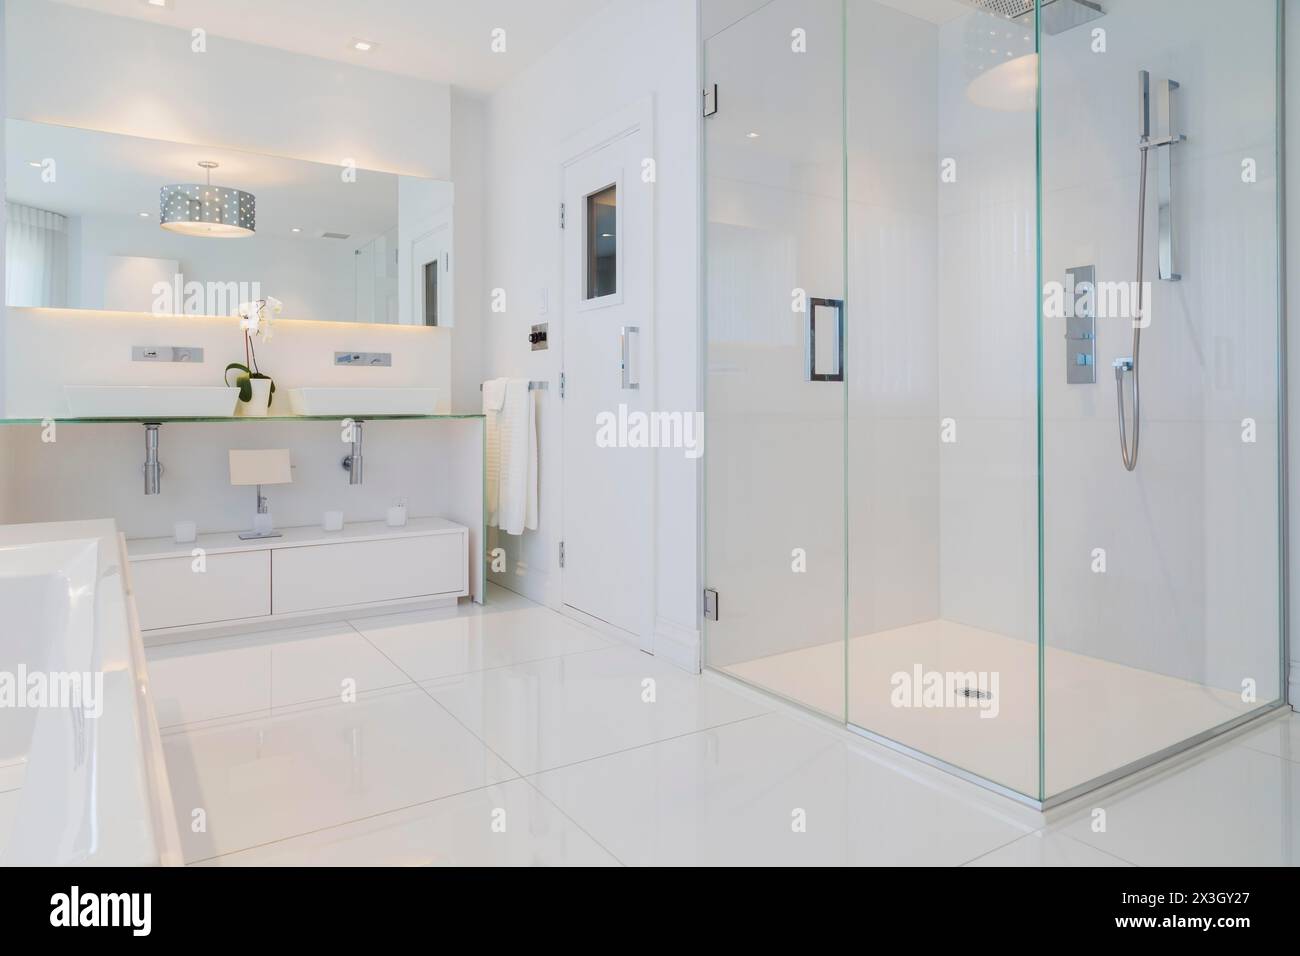 Partial view of white elongated rectangular bathtub and cabinets with large wall mirror, glass shower stall, sauna room door in en suite with ceramic Stock Photo